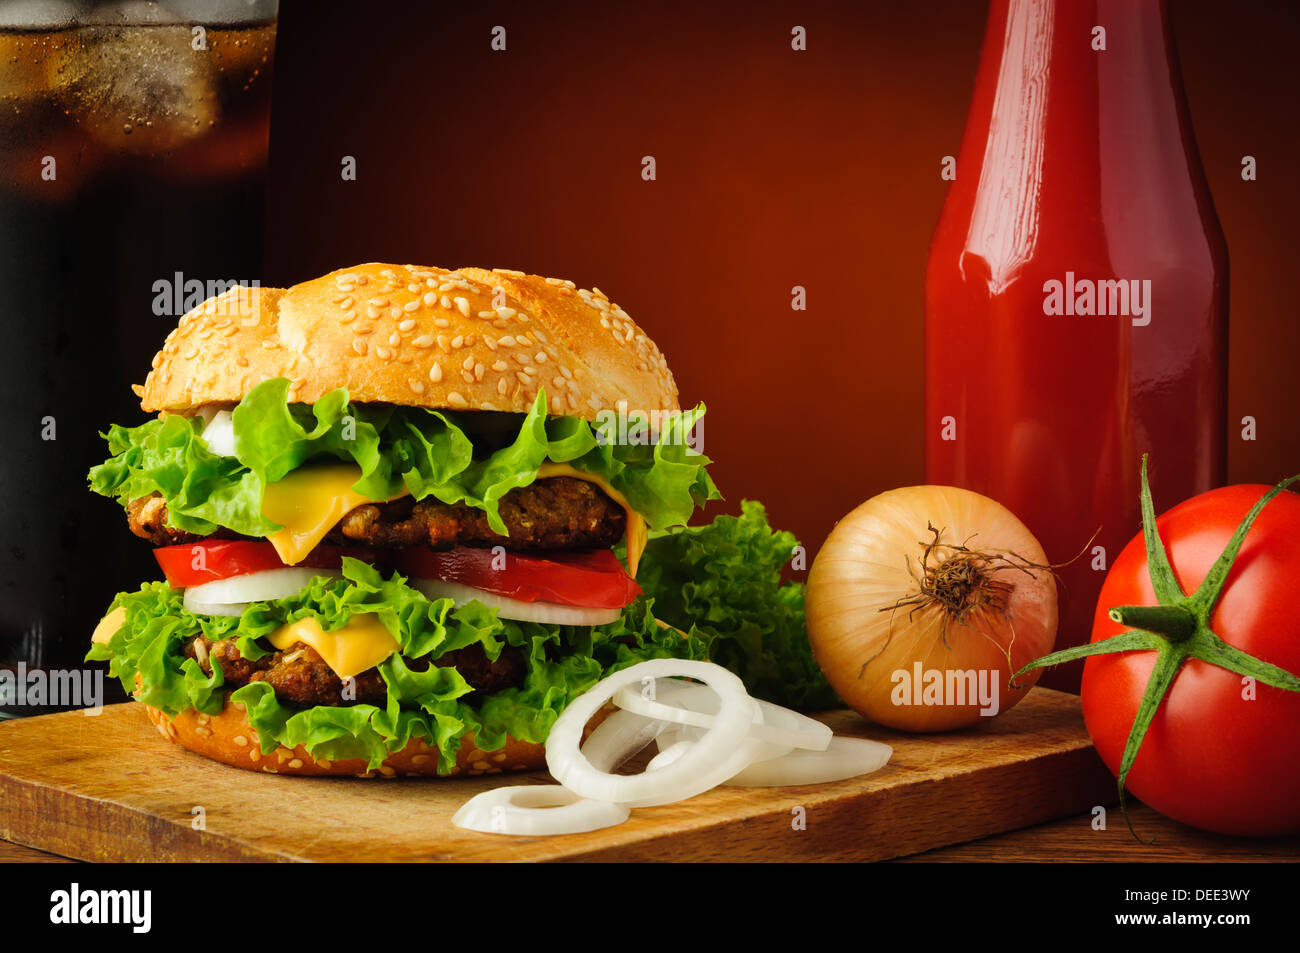 still life with cheeseburger and vegetable ingredients Stock Photo